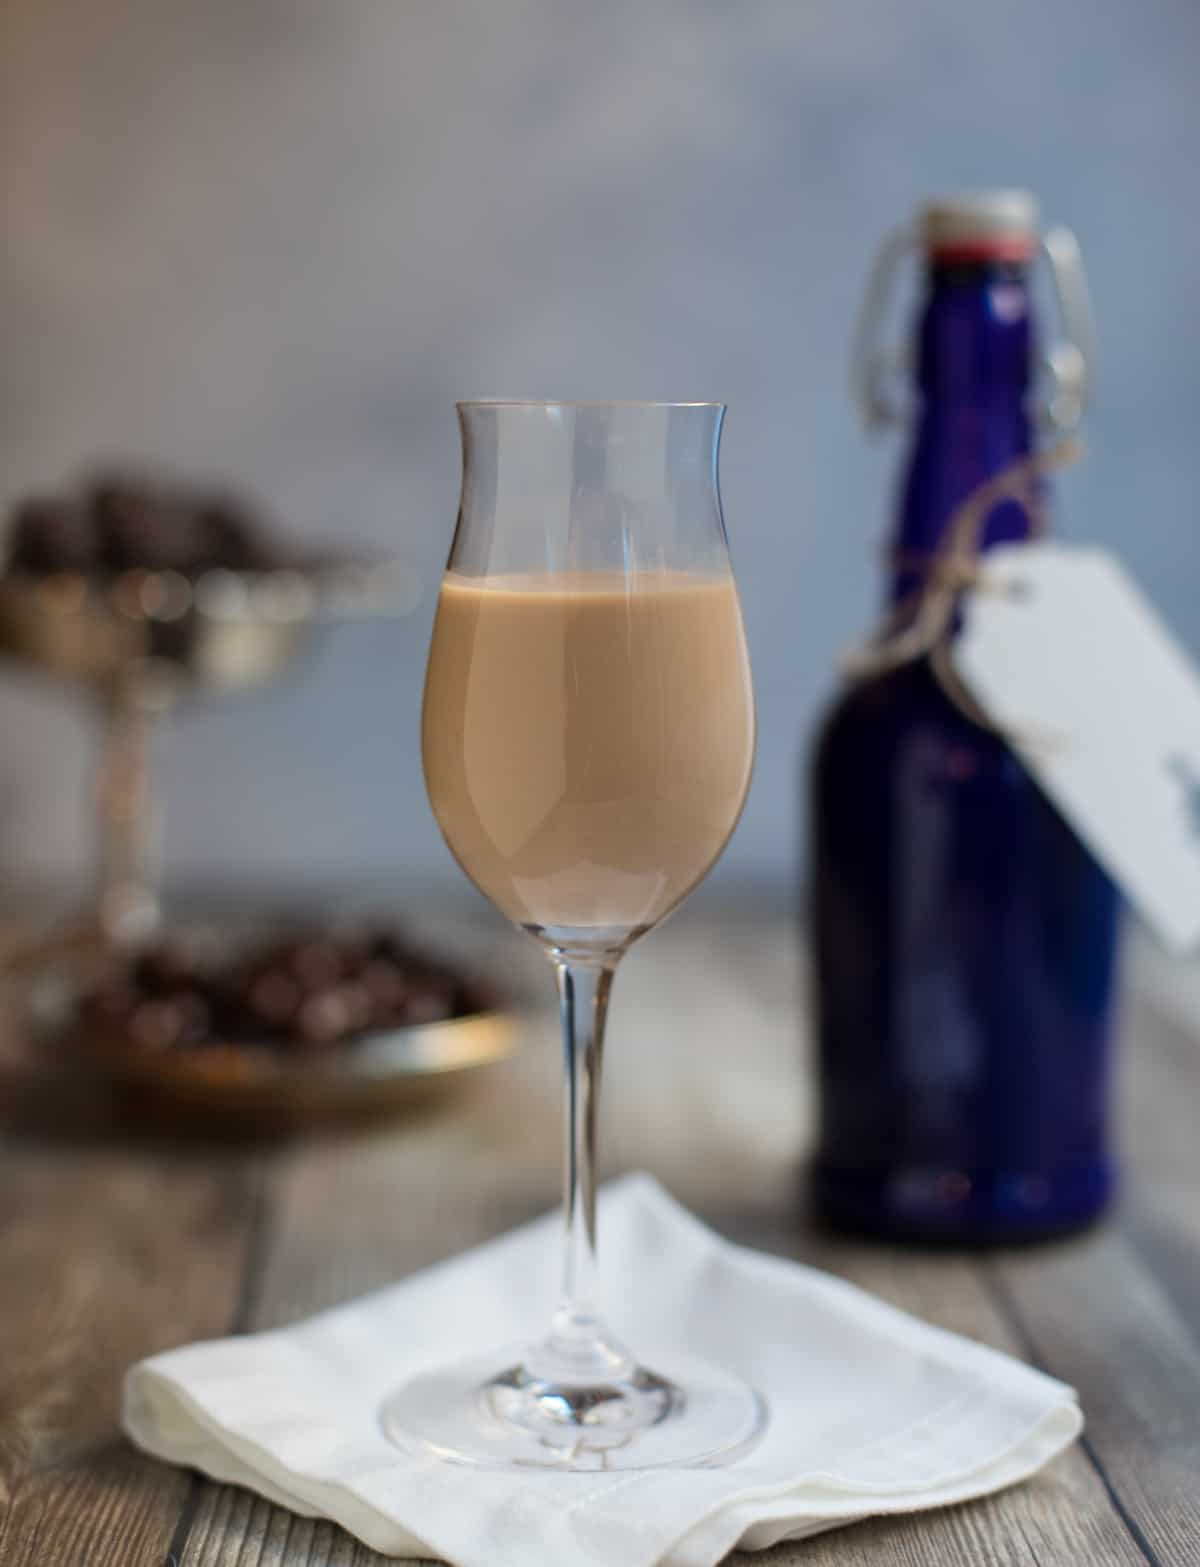 Stemmed glass filled with Irish Cream Liqueur, next to a blue bottle